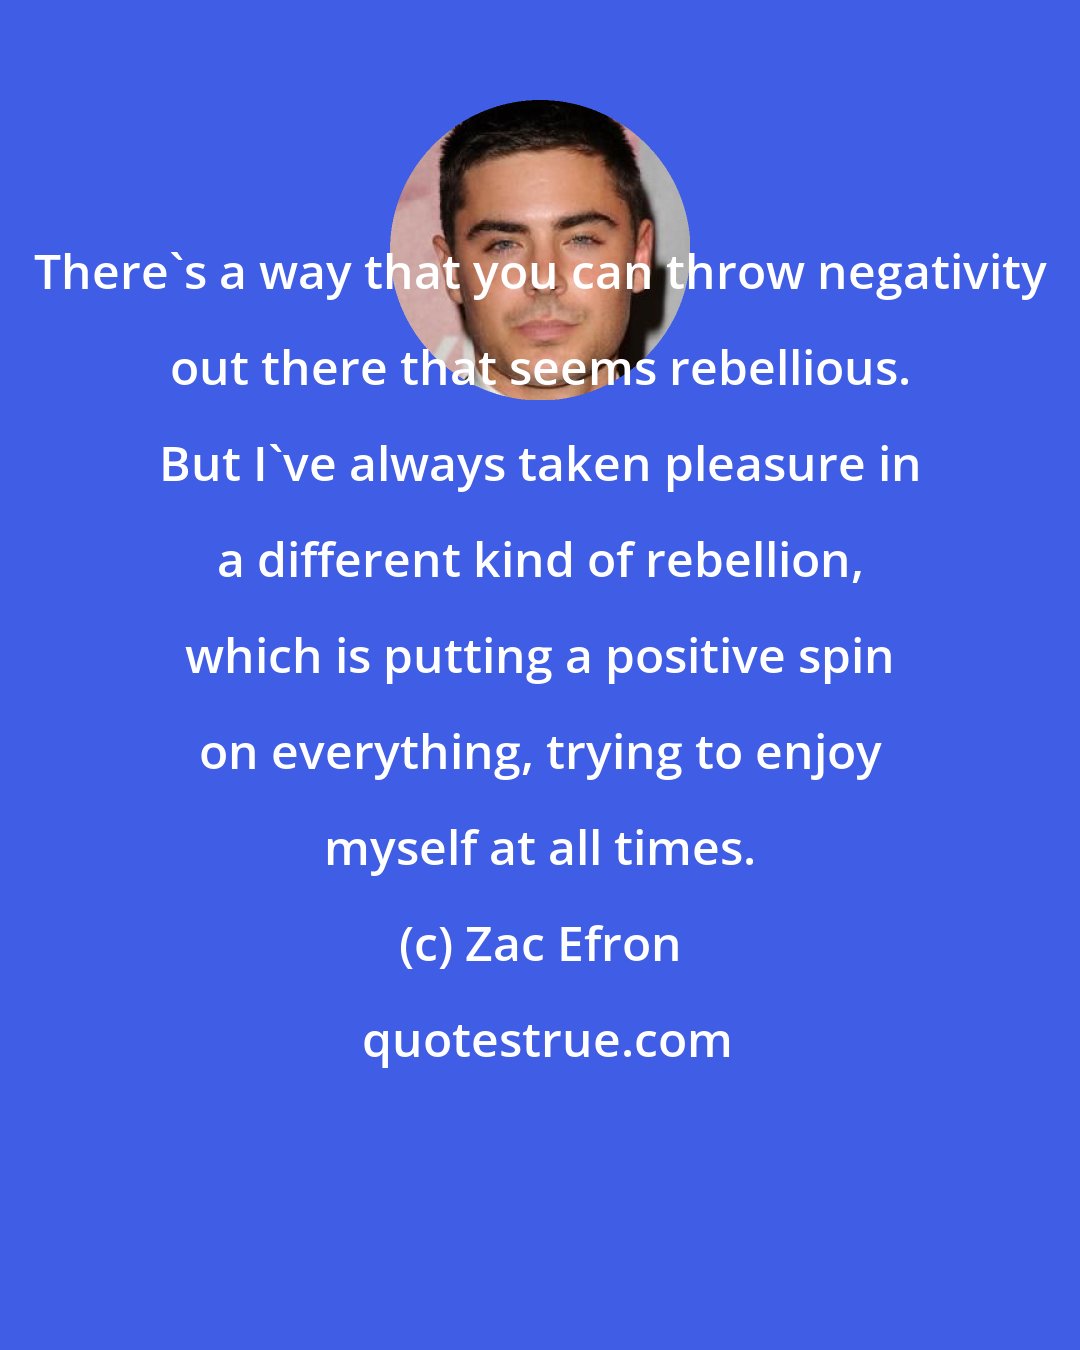 Zac Efron: There's a way that you can throw negativity out there that seems rebellious. But I've always taken pleasure in a different kind of rebellion, which is putting a positive spin on everything, trying to enjoy myself at all times.